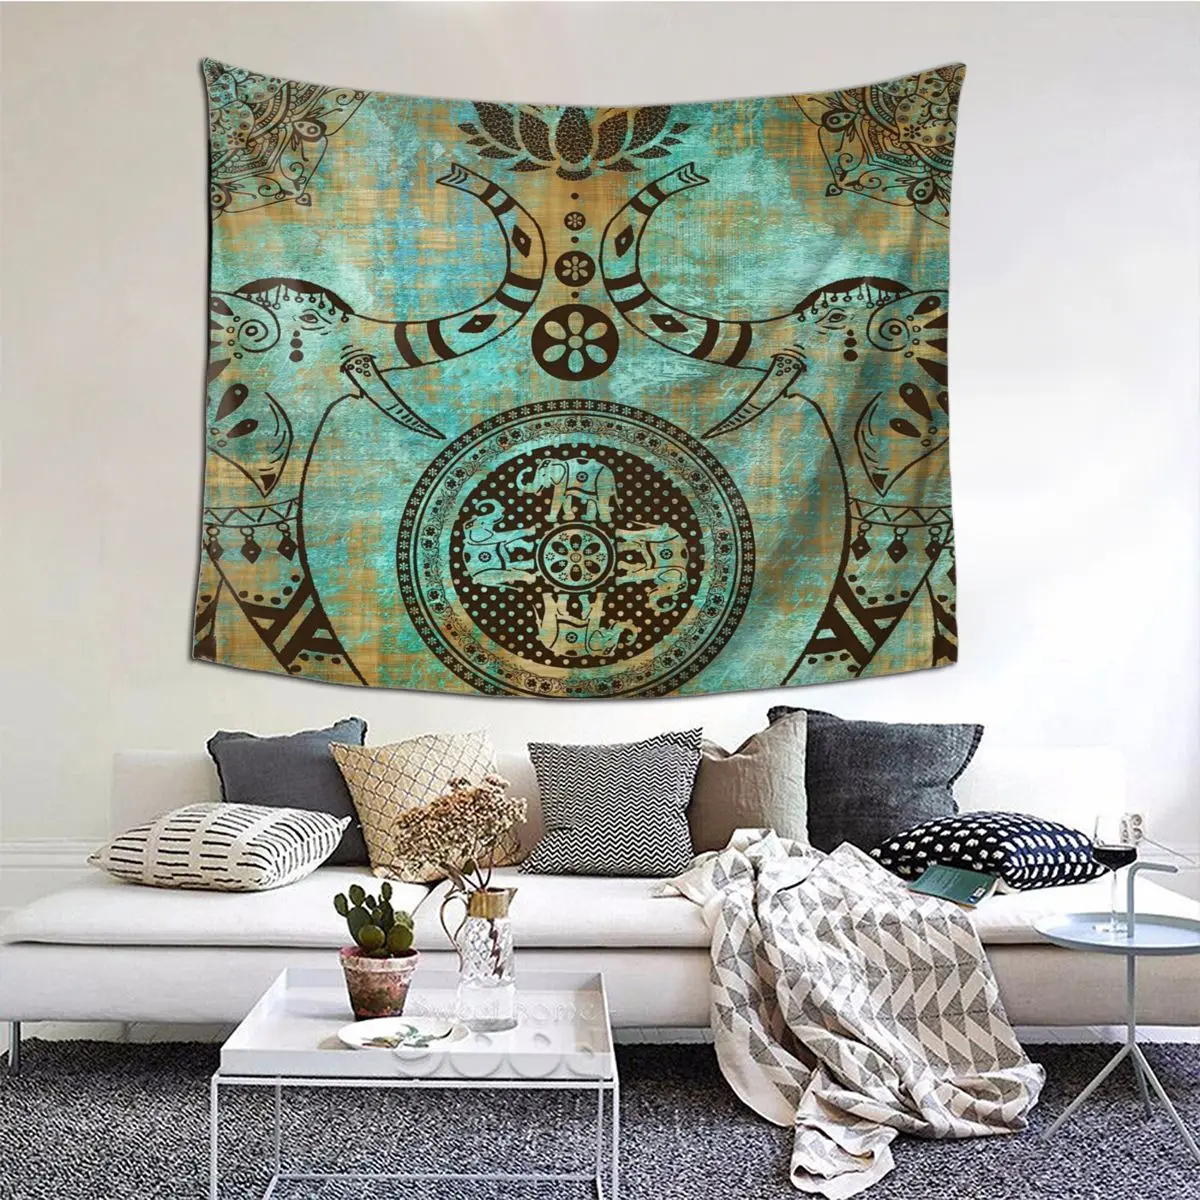 

Elephants Lotus Mandala Tapestry Hippie Polyester Wall Hanging Indian Elephant Room Decor Fashion Wall Tapestry 95x73cm